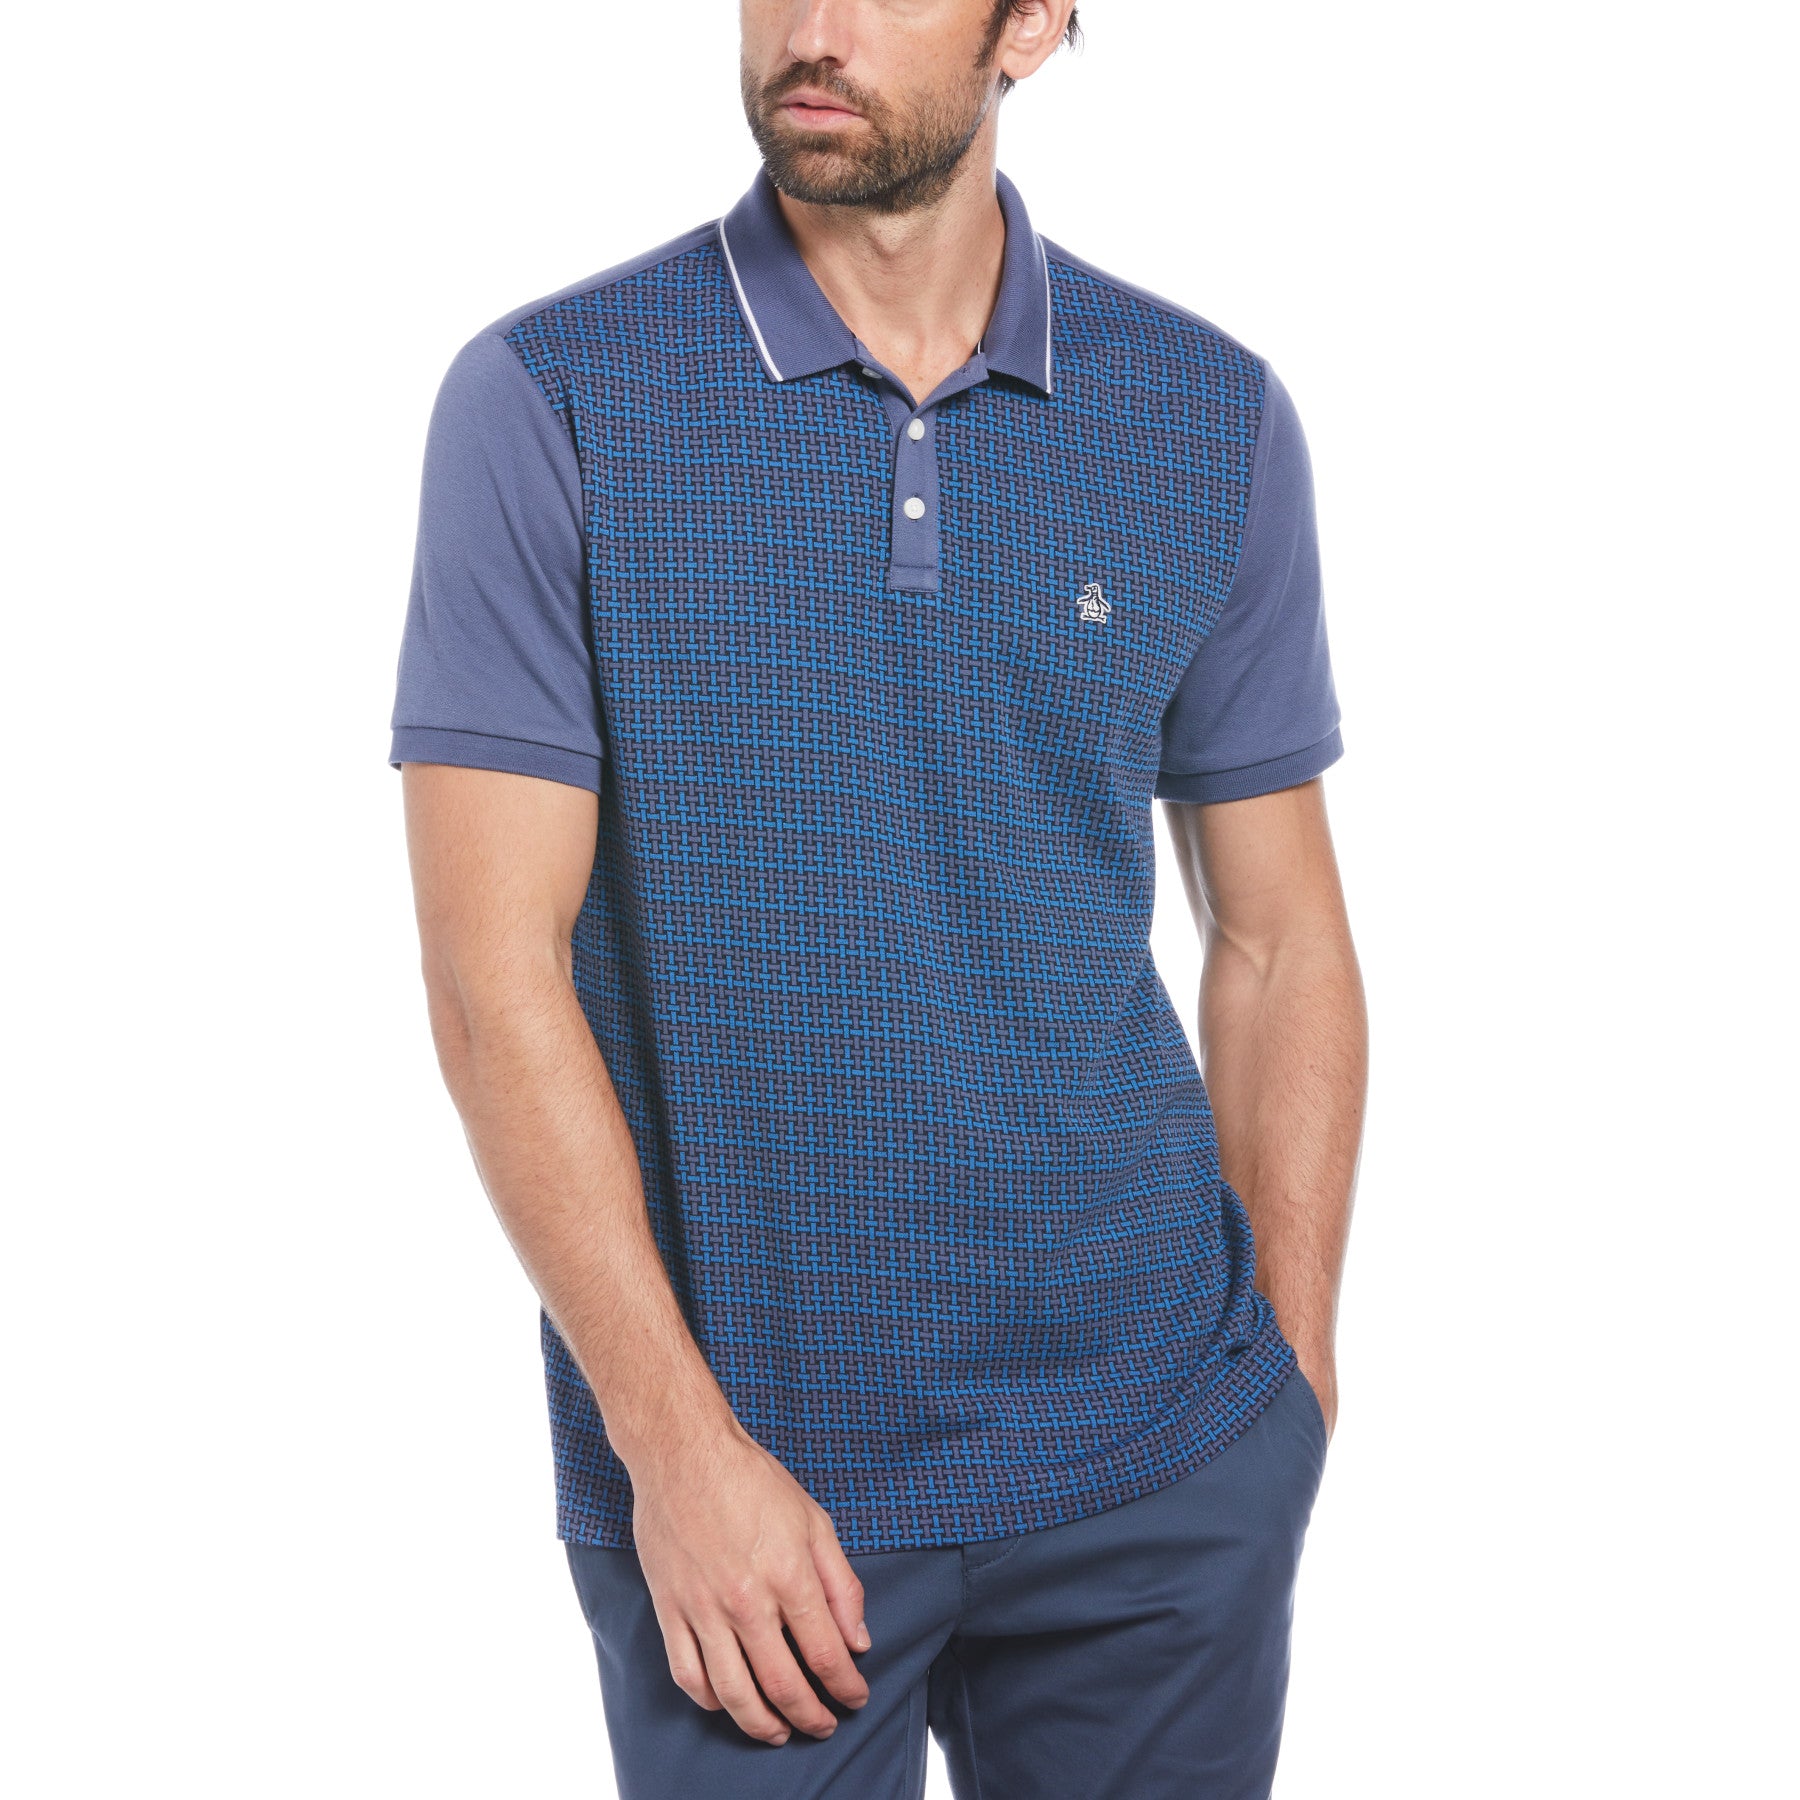 View Jacquard Front Basketweave Pattern Short Sleeve Polo Shirt In Blue Ind information